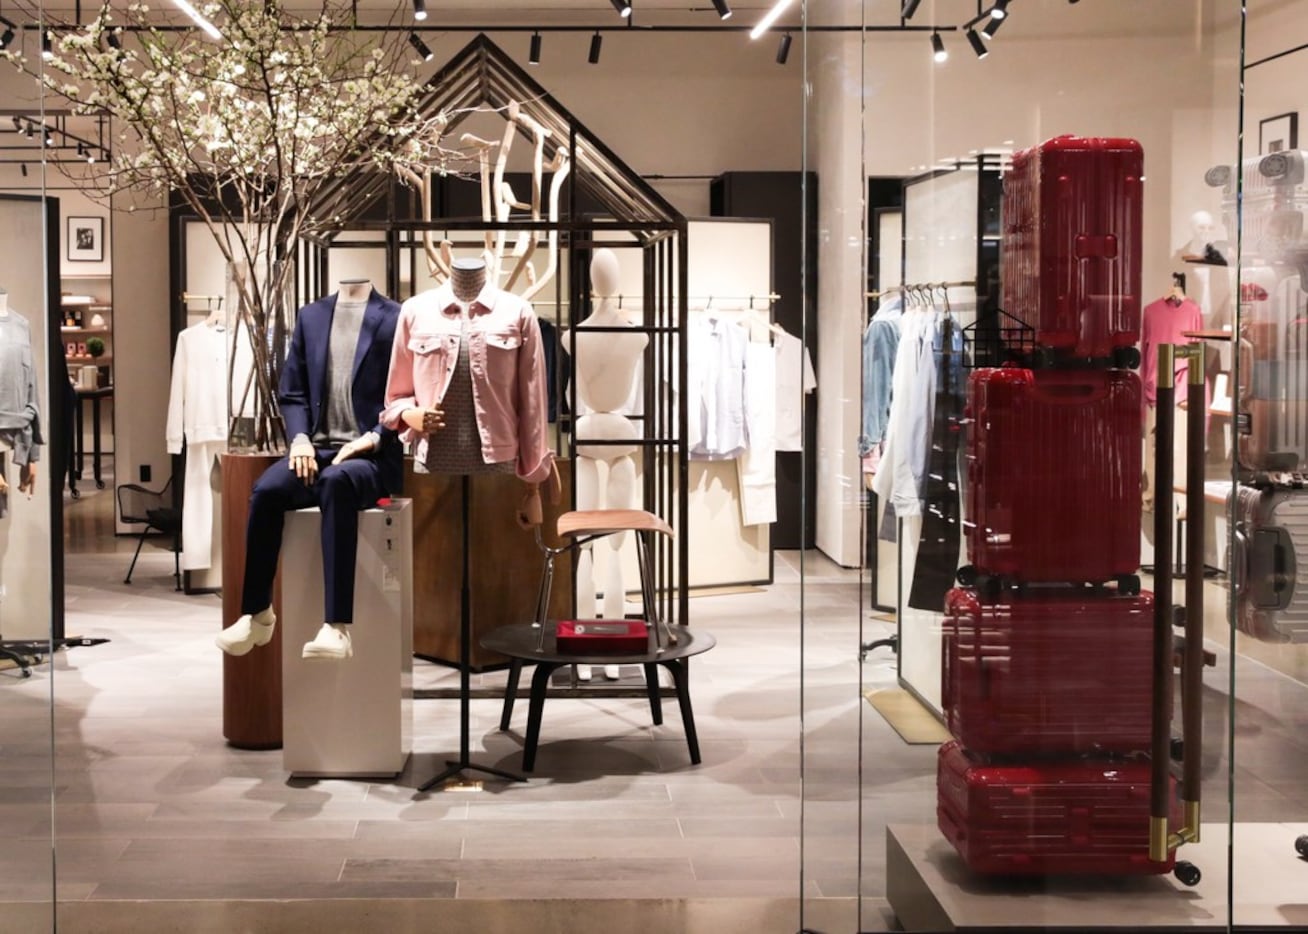 The Conservatory  is a new concept that merges luxury online shopping with physical space.